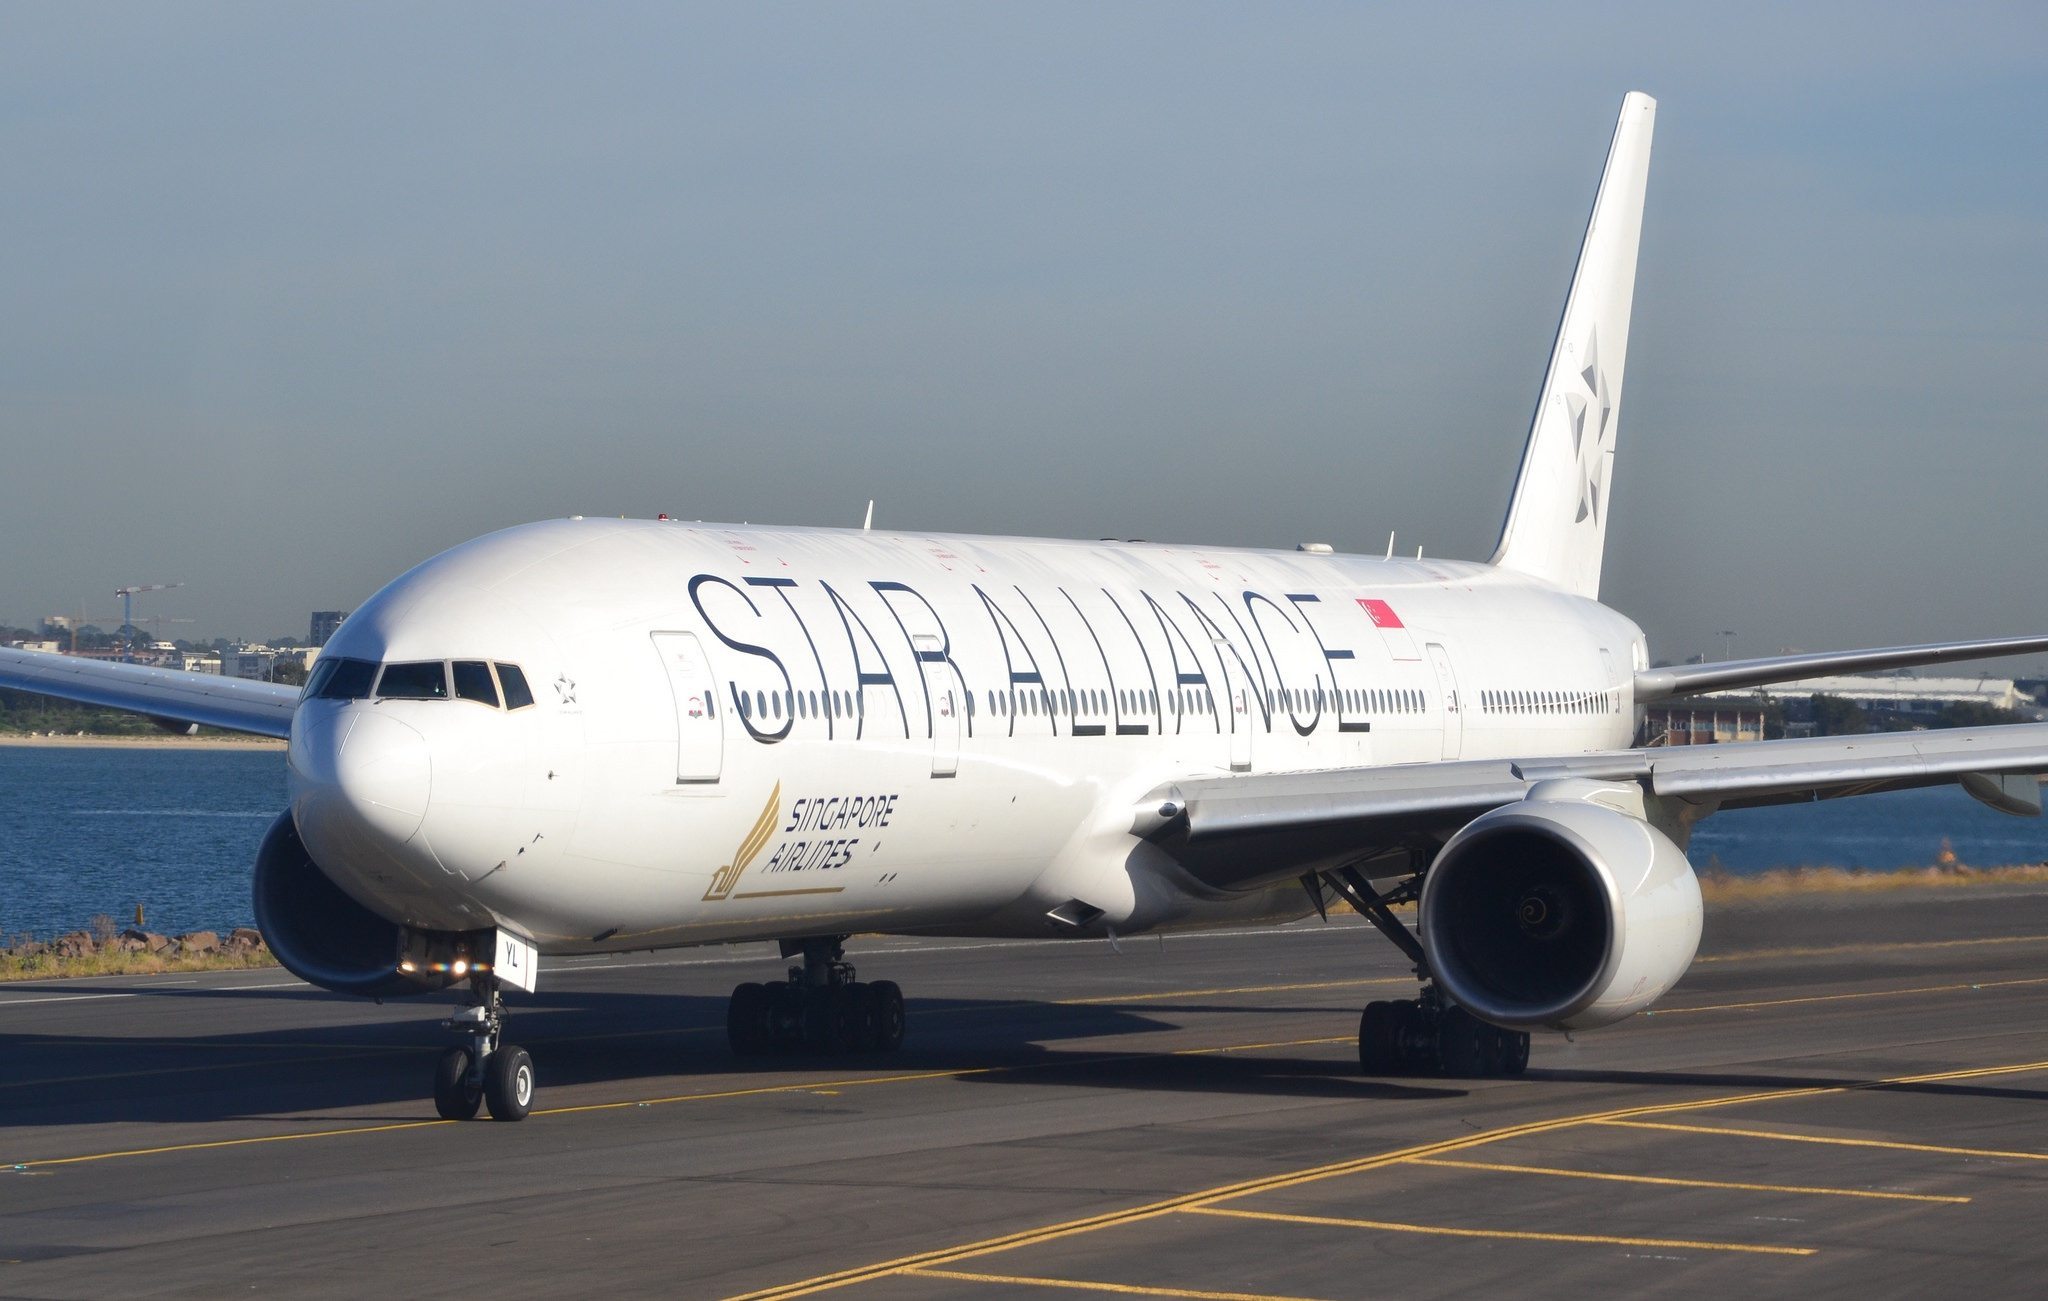 Star Alliance Livery Singapore Airlines. 